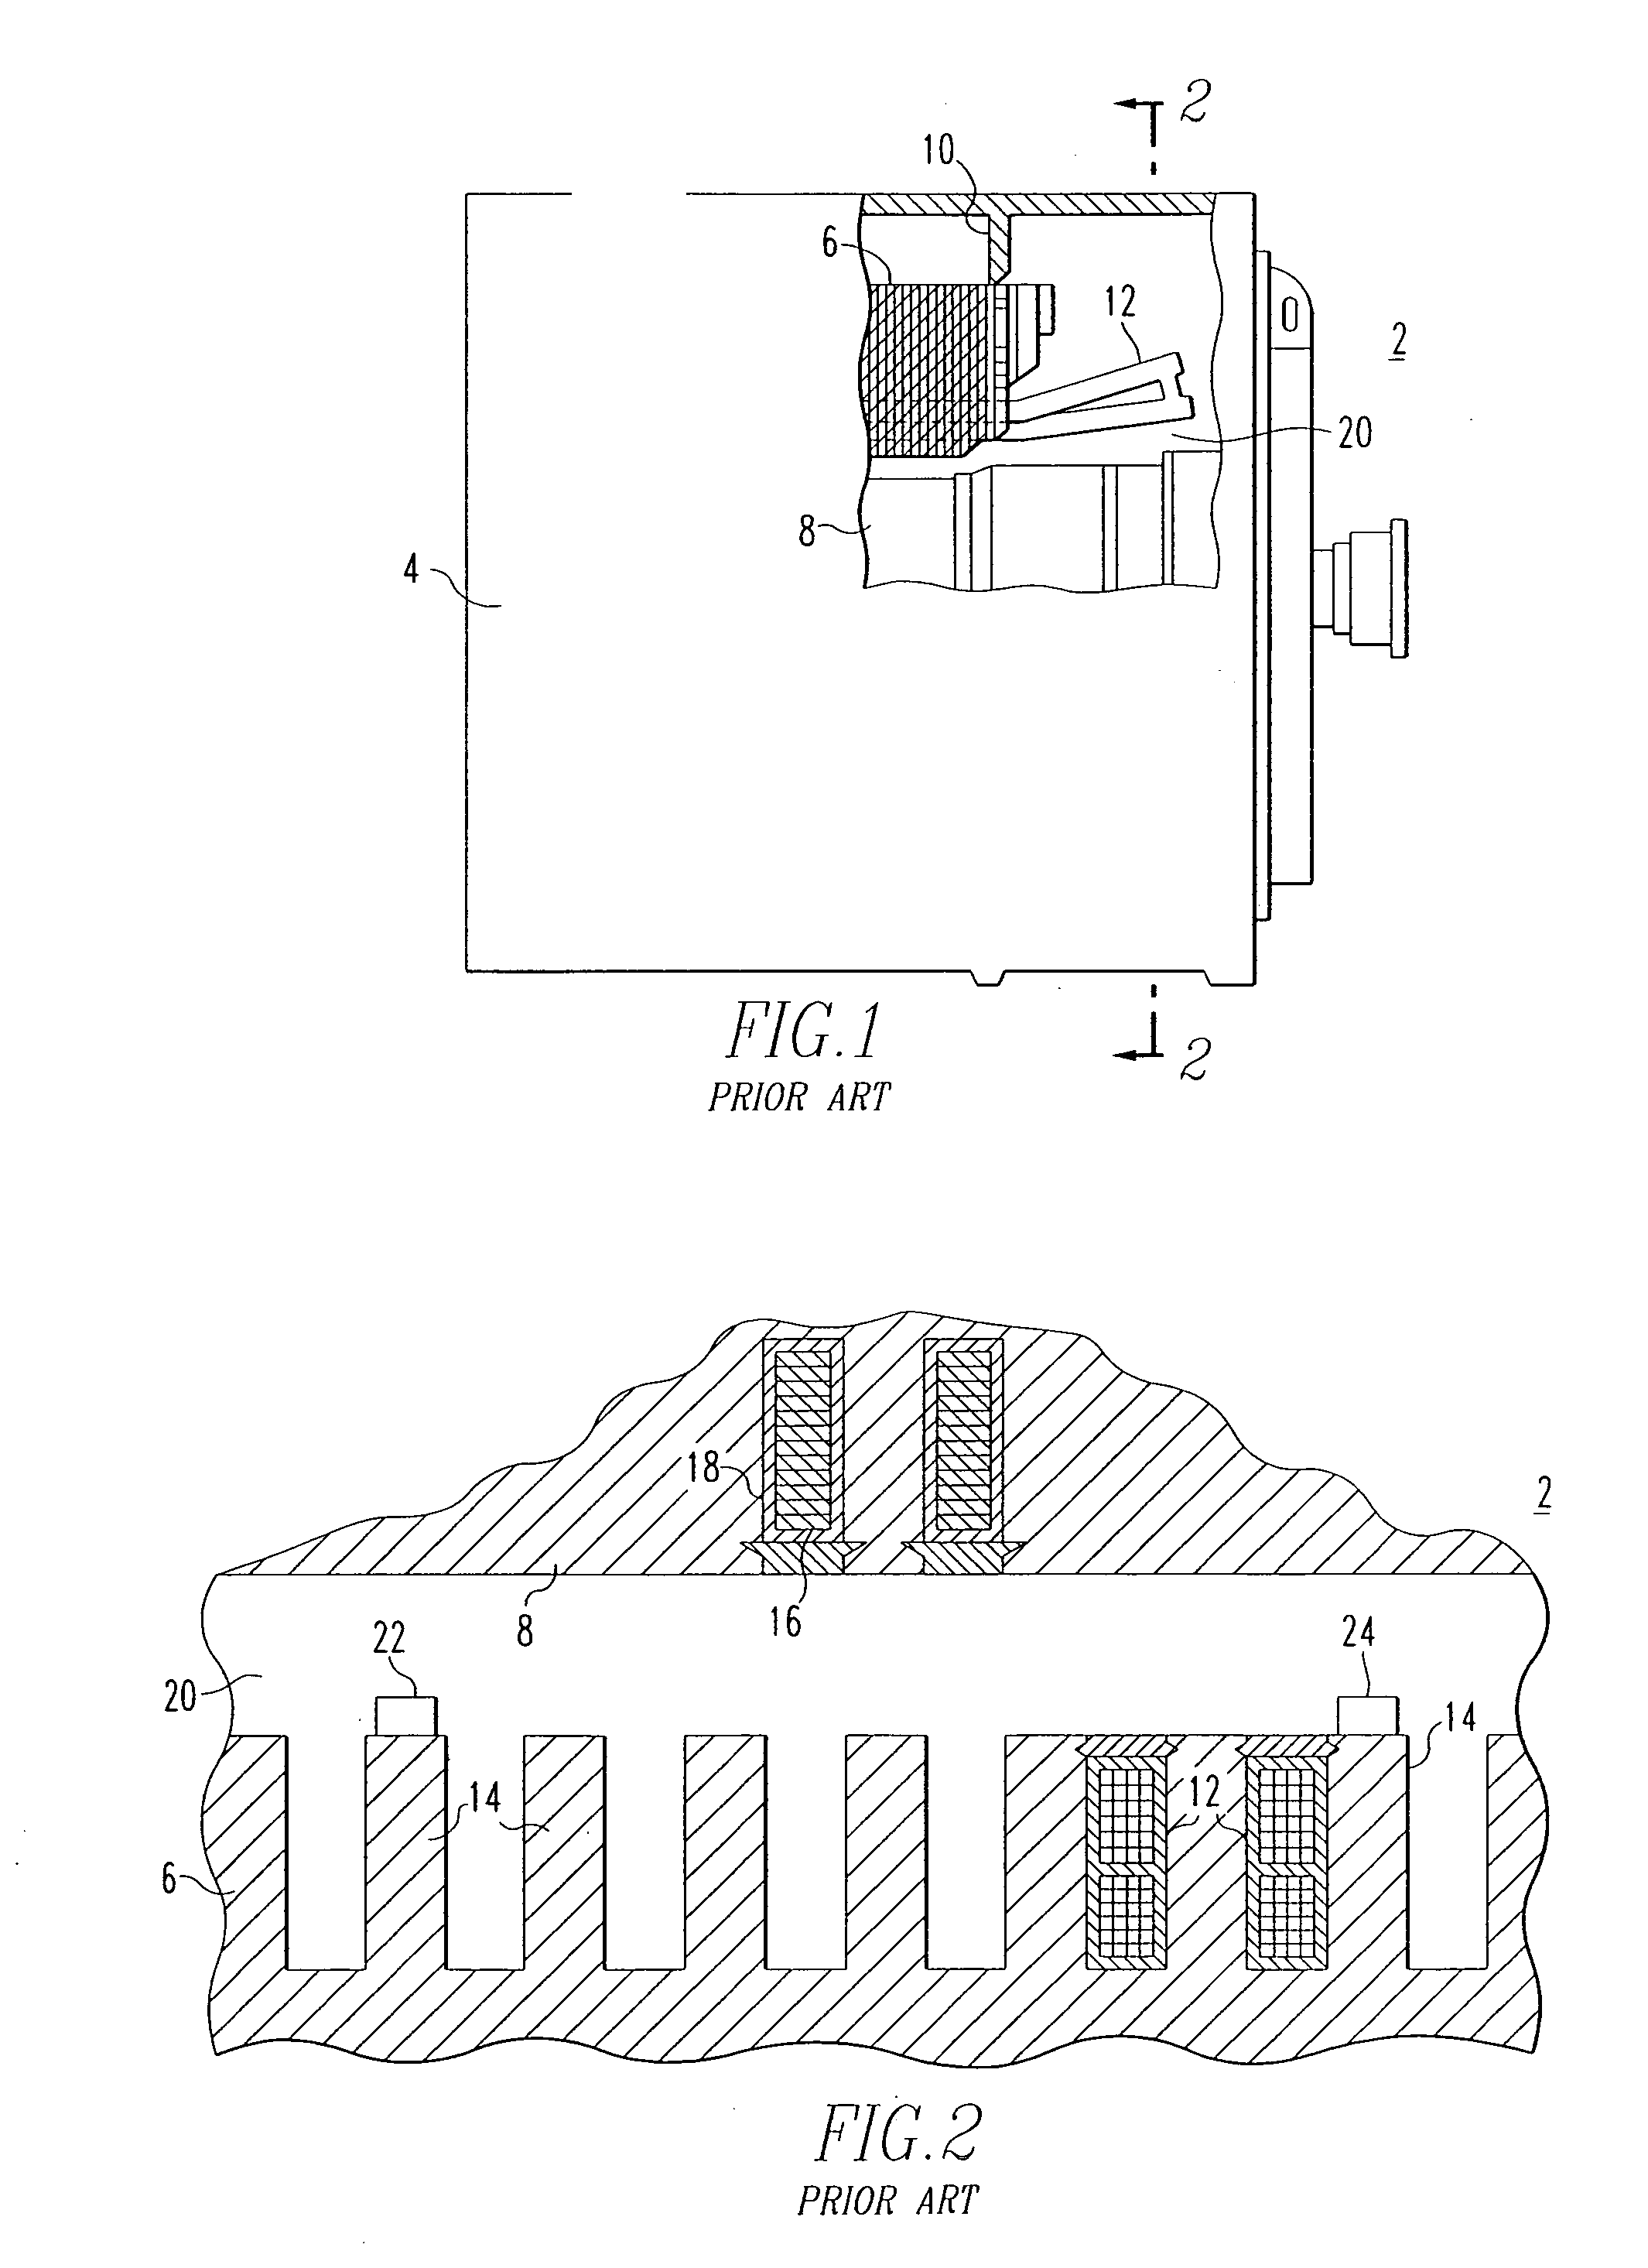 Search coil mount for facilitating inspection of a generator rotor in situ